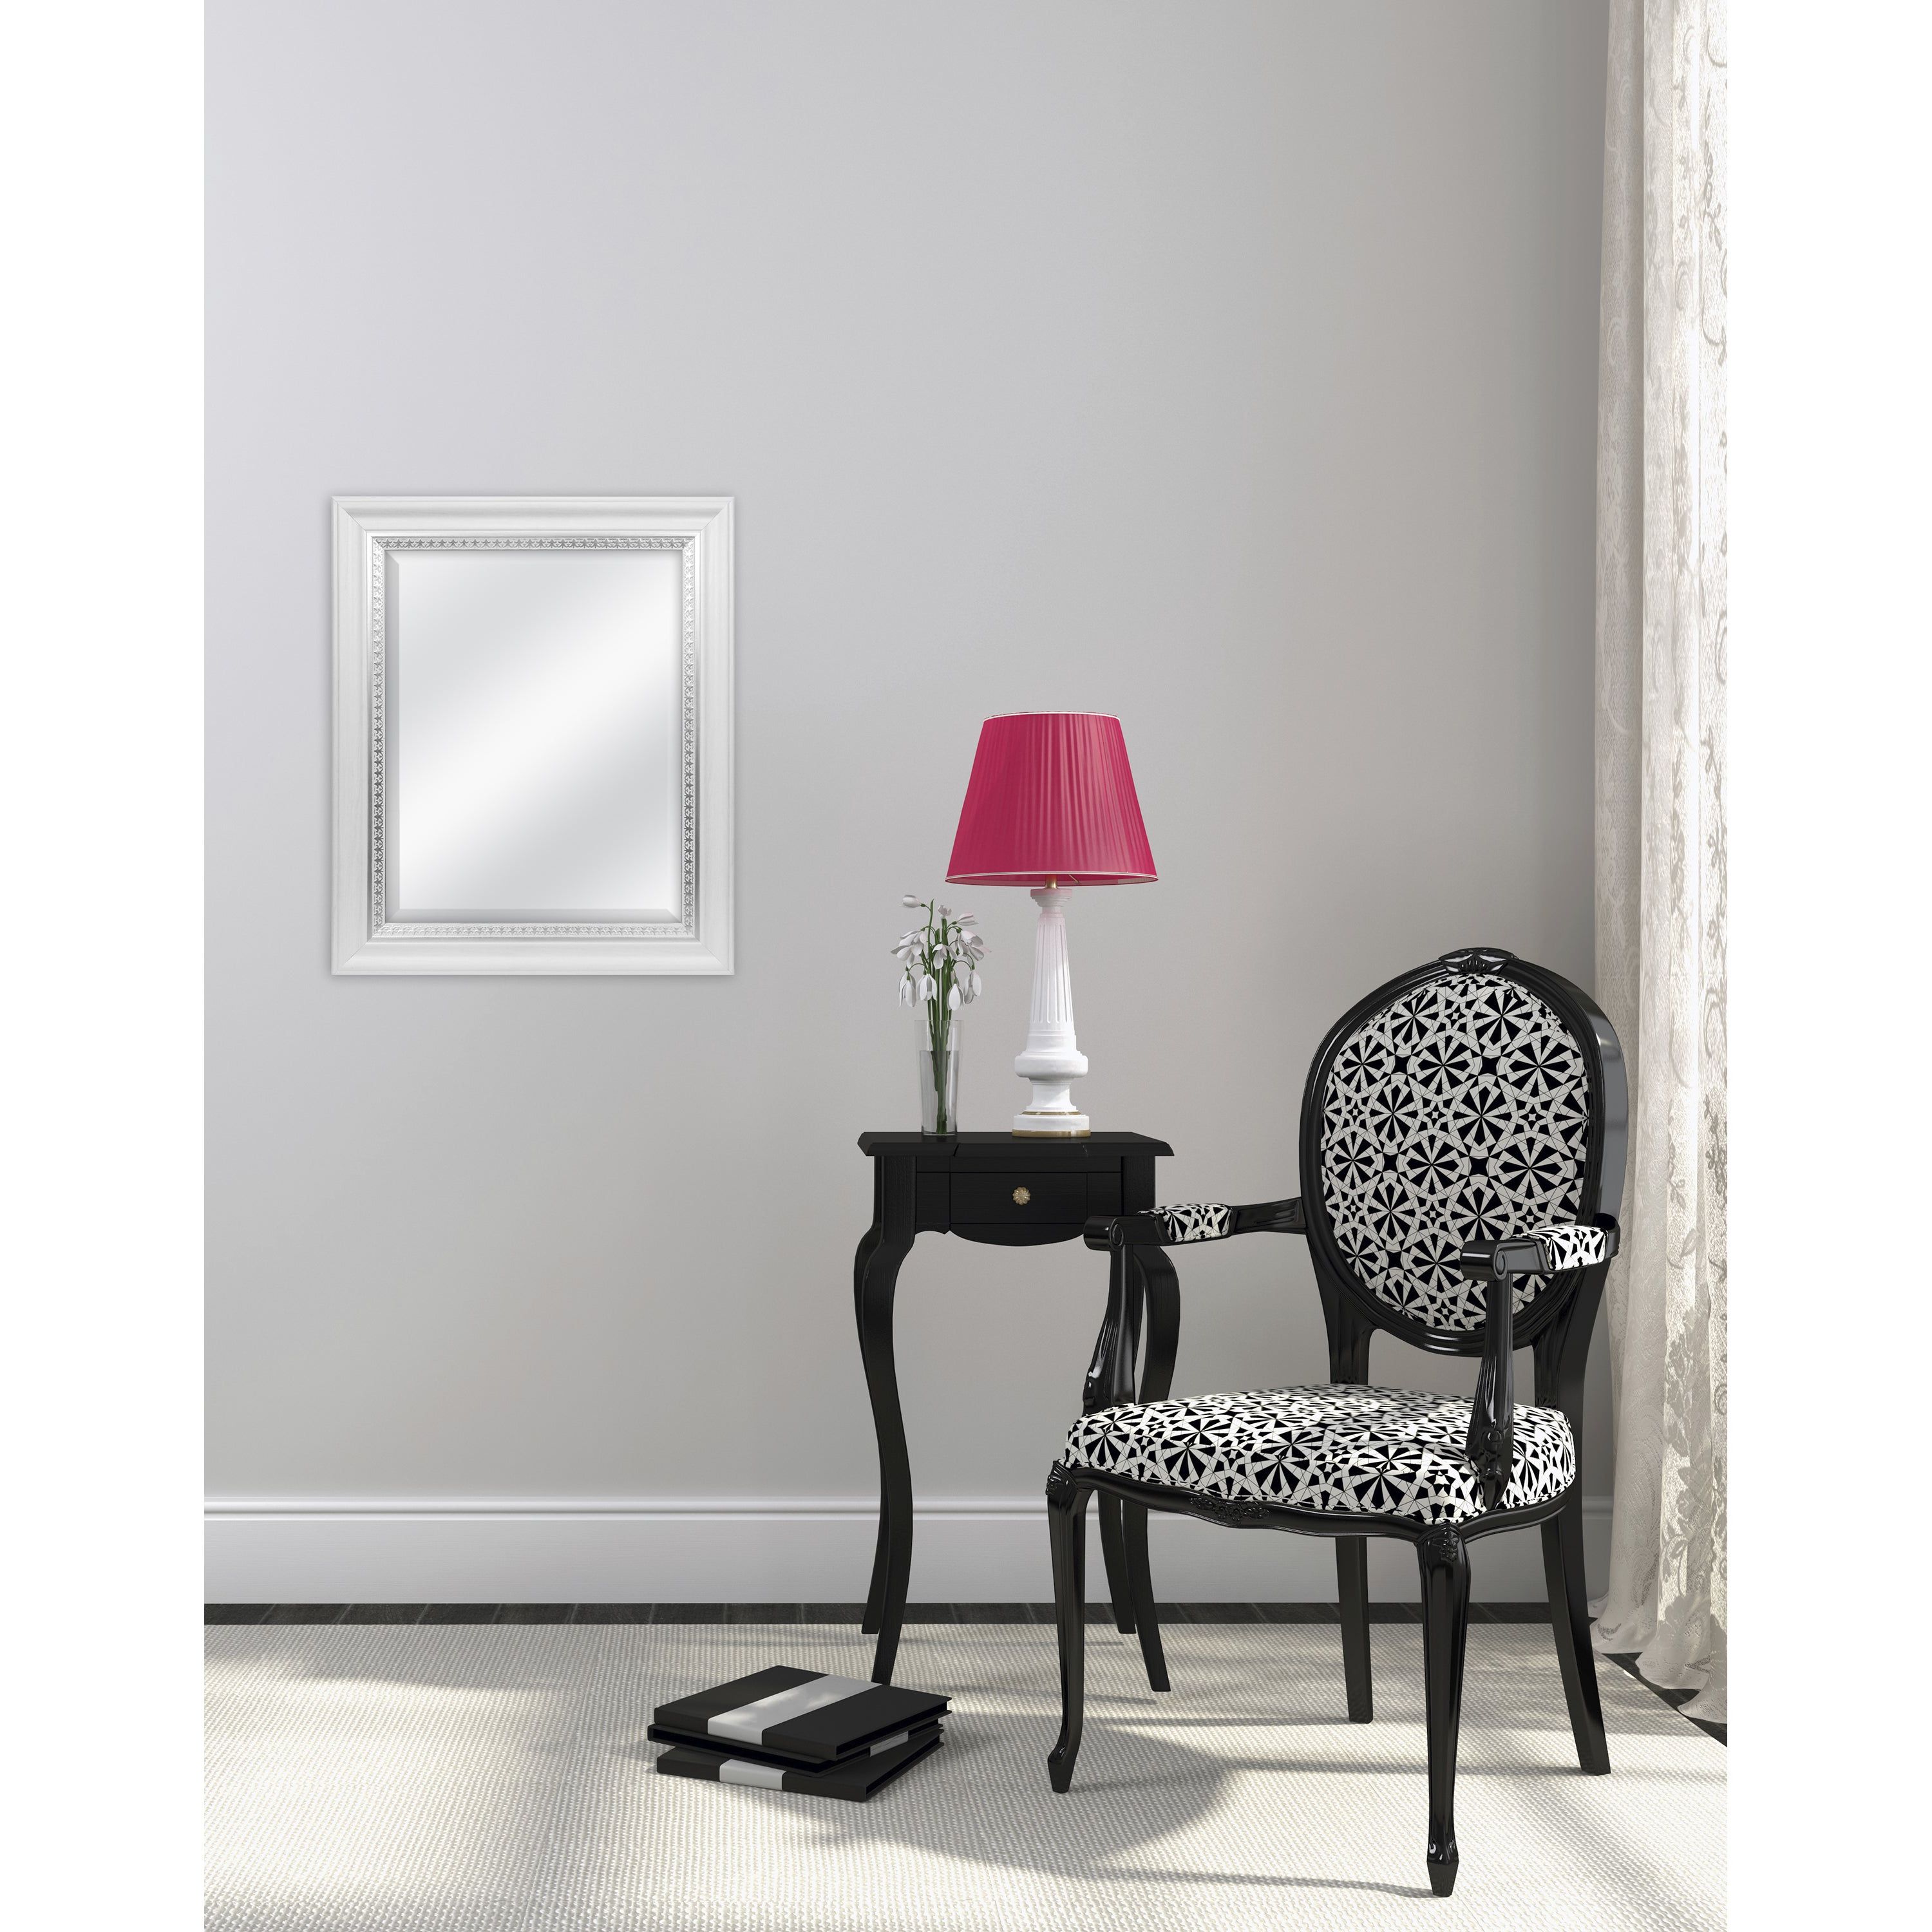 Mcs Industries White Woodgrain Wall Mirror With Silver Leaf Accent Pertaining To Well Known Farmhouse Woodgrain And Leaf Accent Wall Mirrors (View 11 of 20)